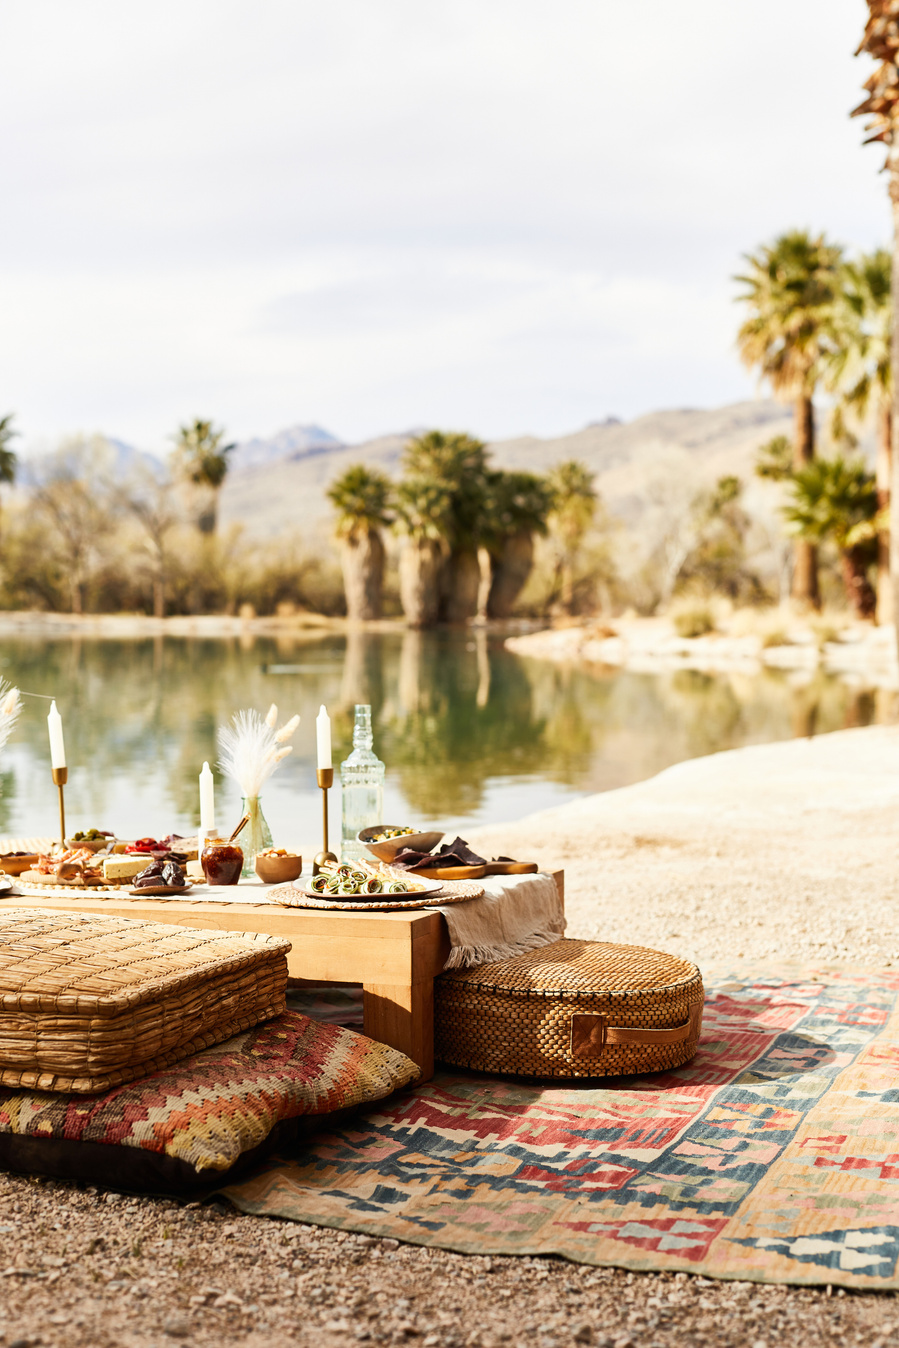 Glam picnic set up on a blanket with cushions on a sandy lakeshore with palm trees in the distance. Lifestyle food photography for The Buckle